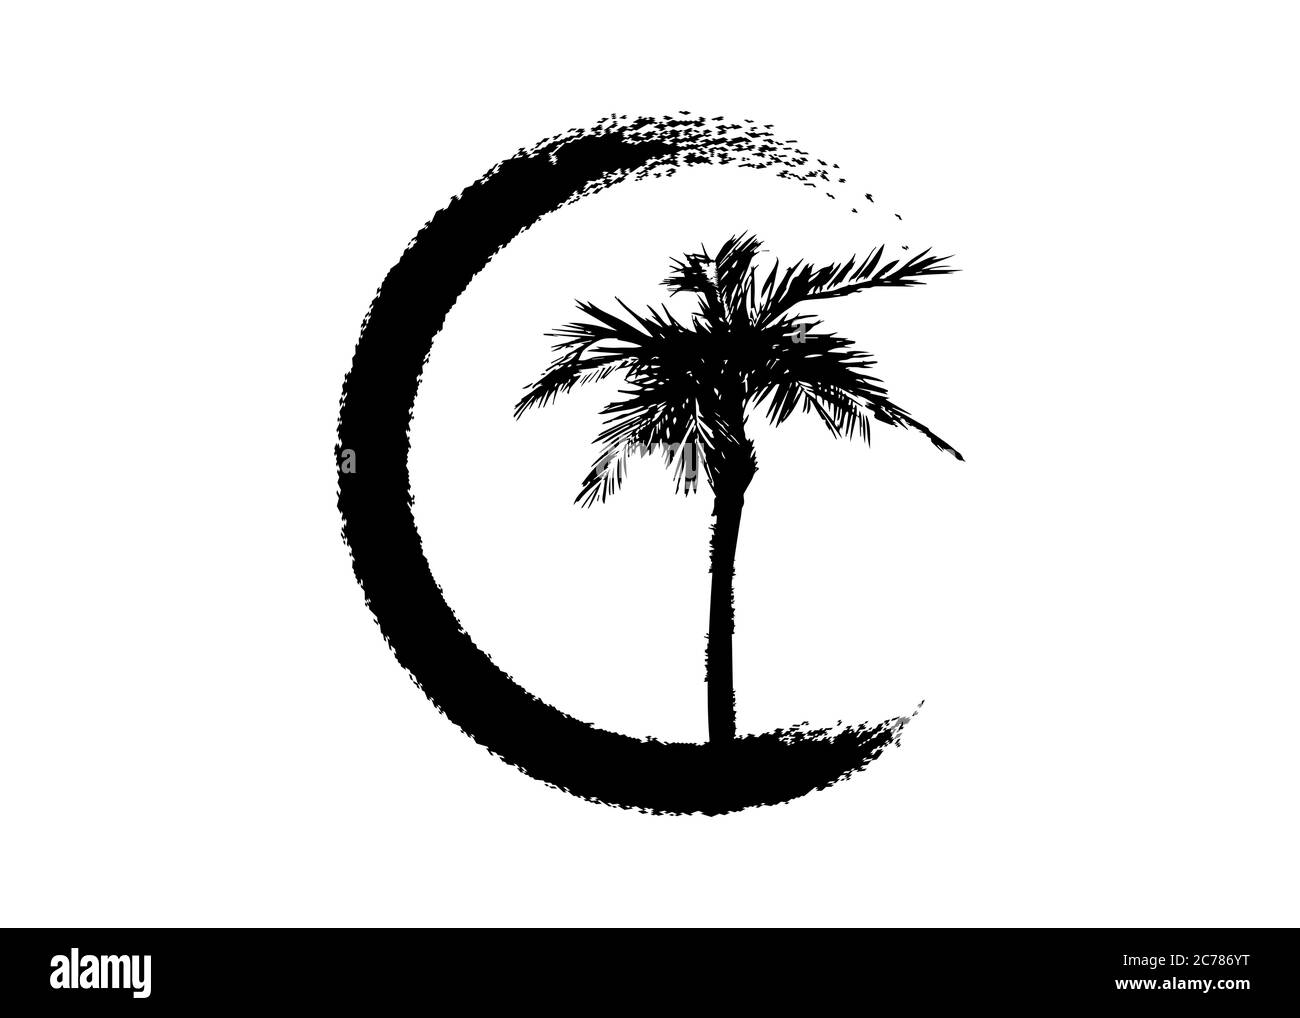 Nature | Black and White Logo Vector Art Graphic by Creative Oasis ·  Creative Fabrica